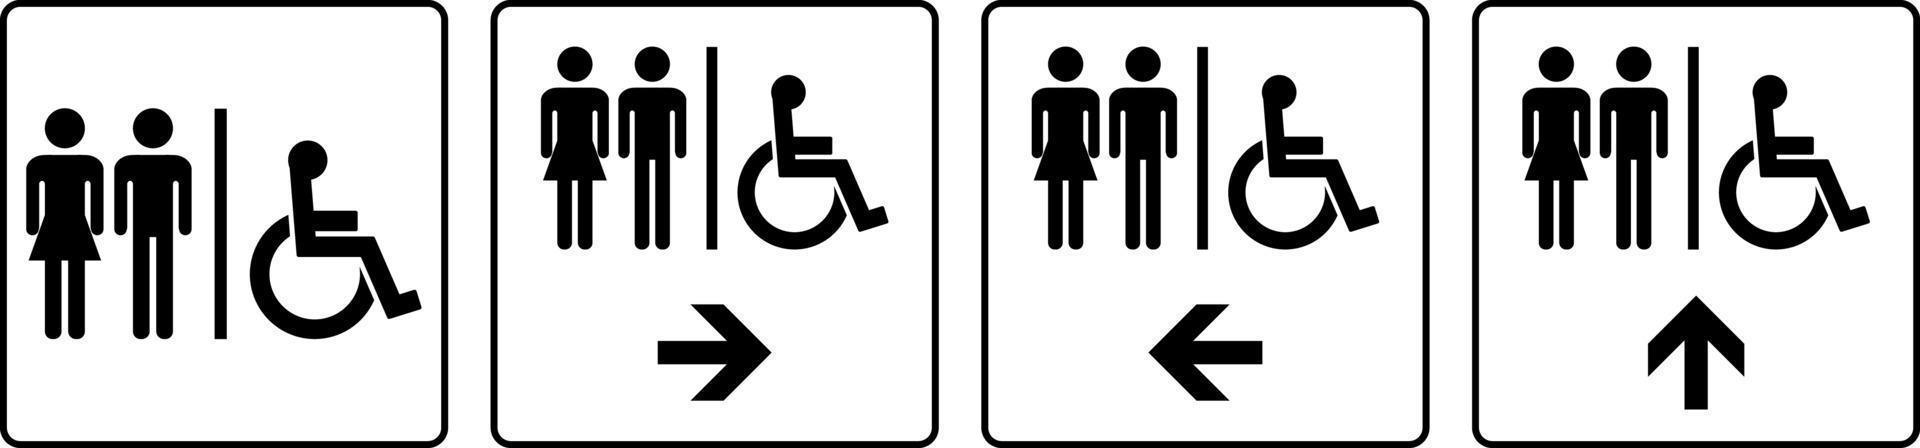 Unisex And Disabled Symbol Toilet Door Sign vector